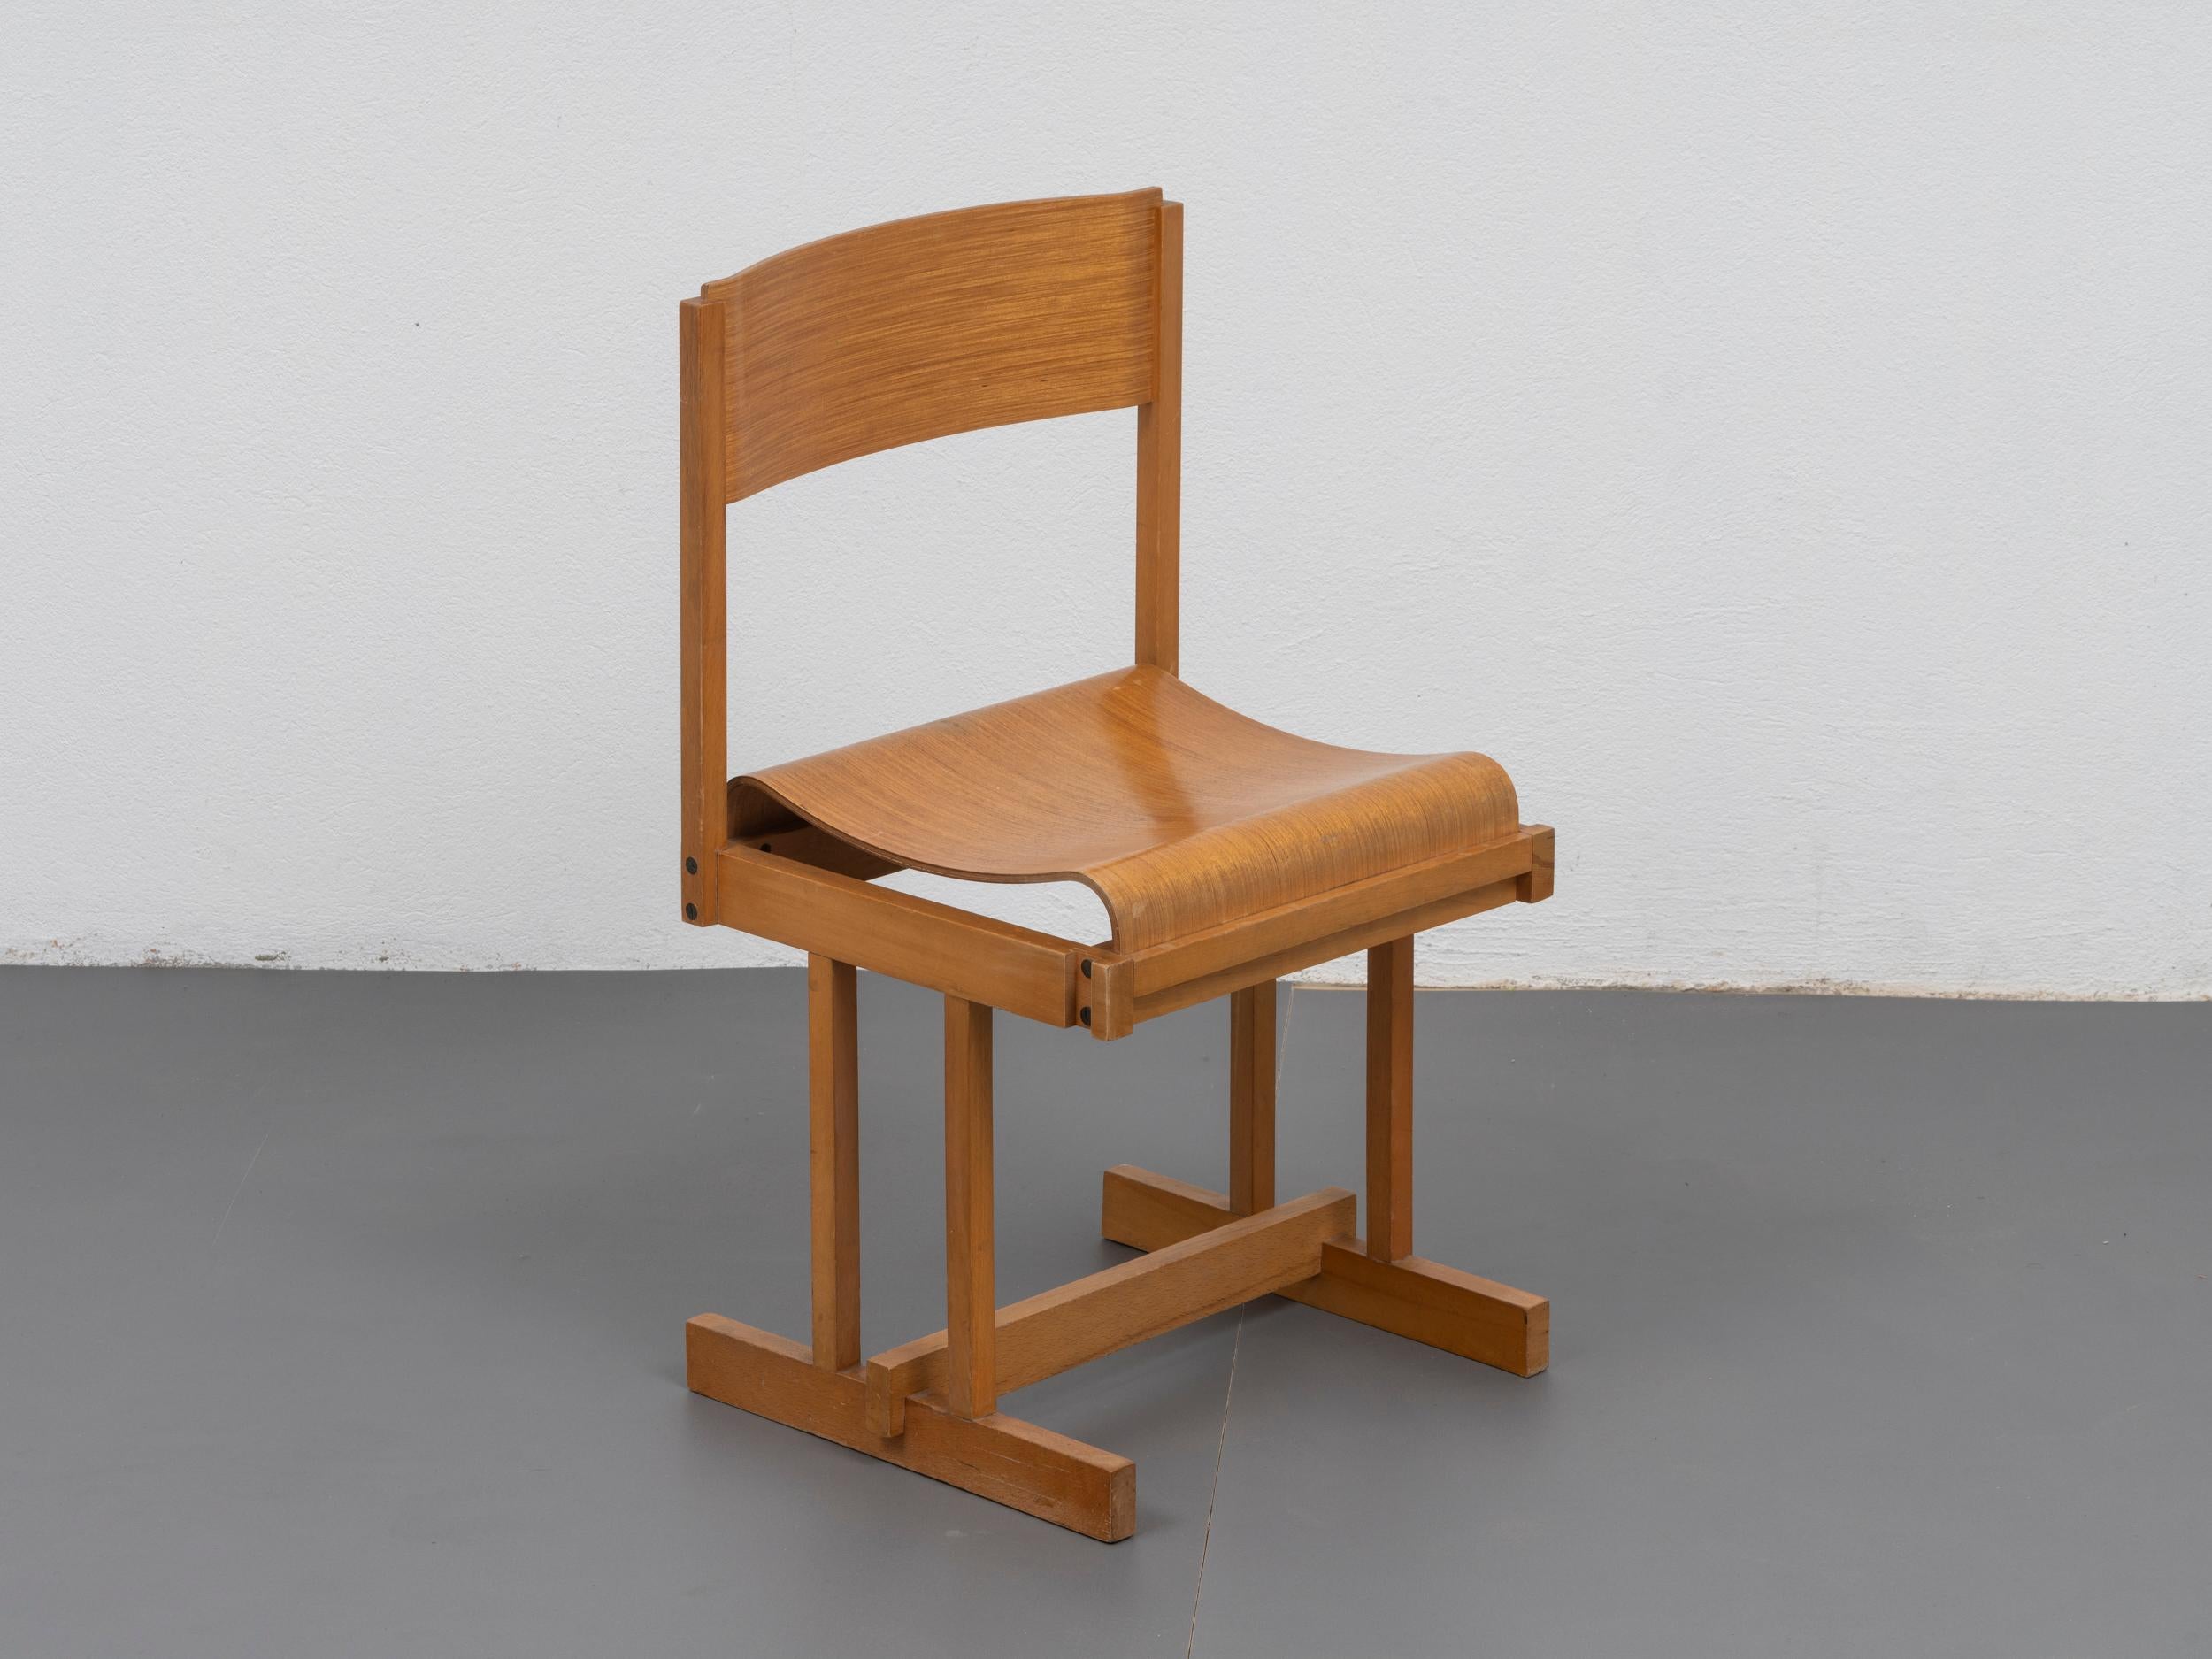 Sculptural chair made of wood and plywood, with a beautiful and light shape, full or architectural details. Italian work from the 1970s, designer not yet identified.